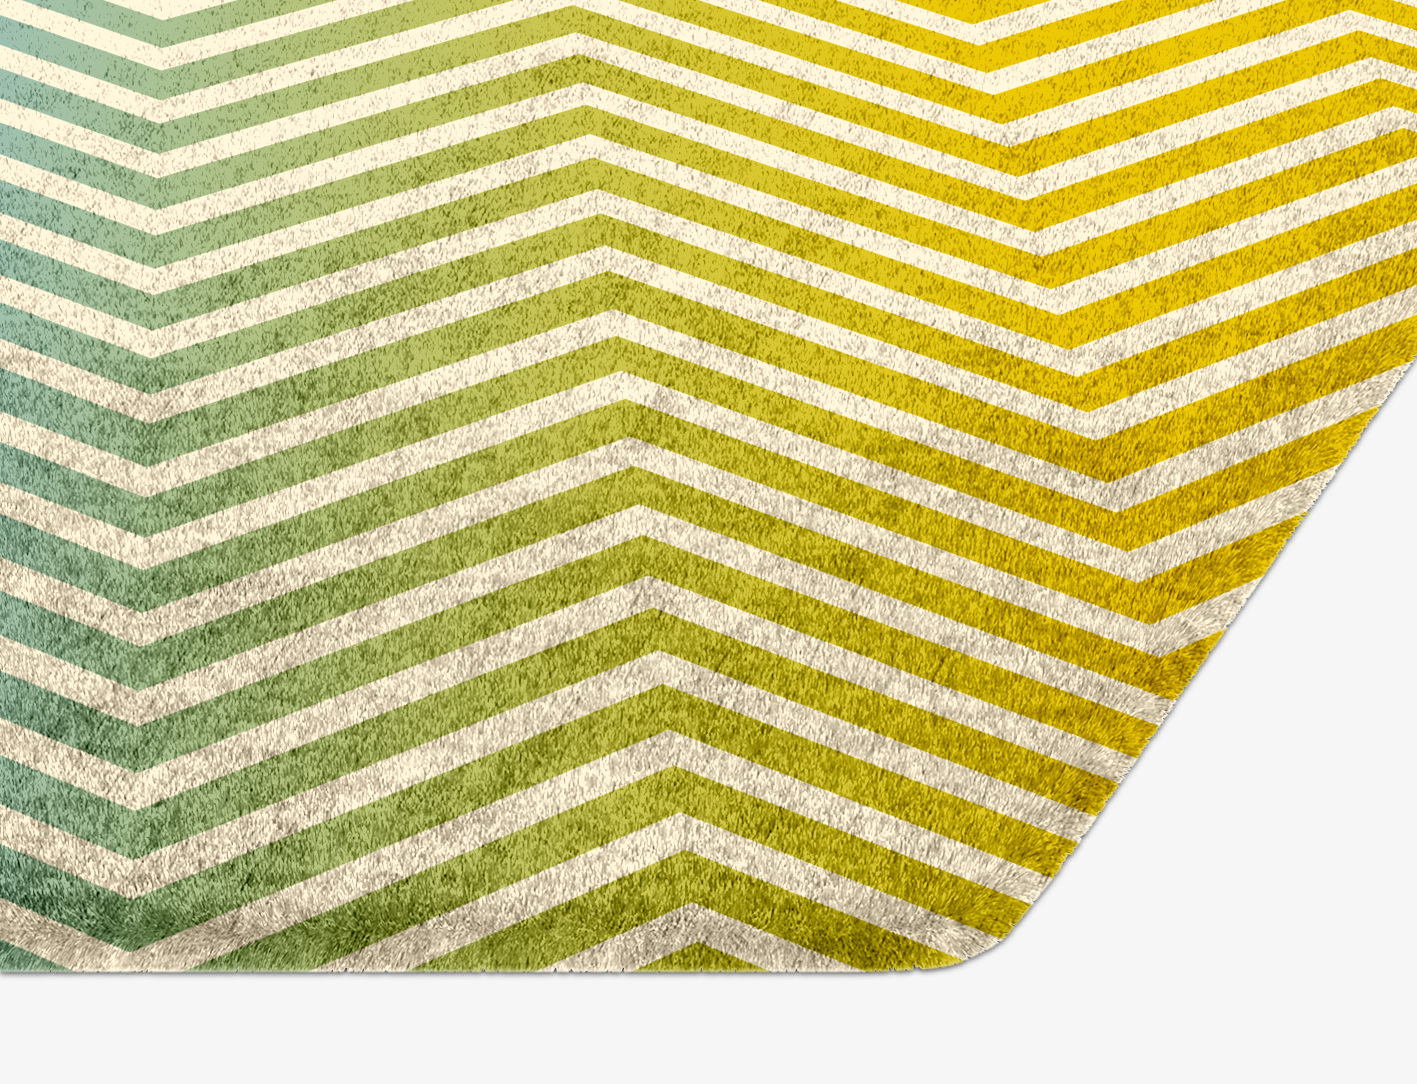 Zigzag Ombre Hexagon Hand Knotted Bamboo Silk Custom Rug by Rug Artisan